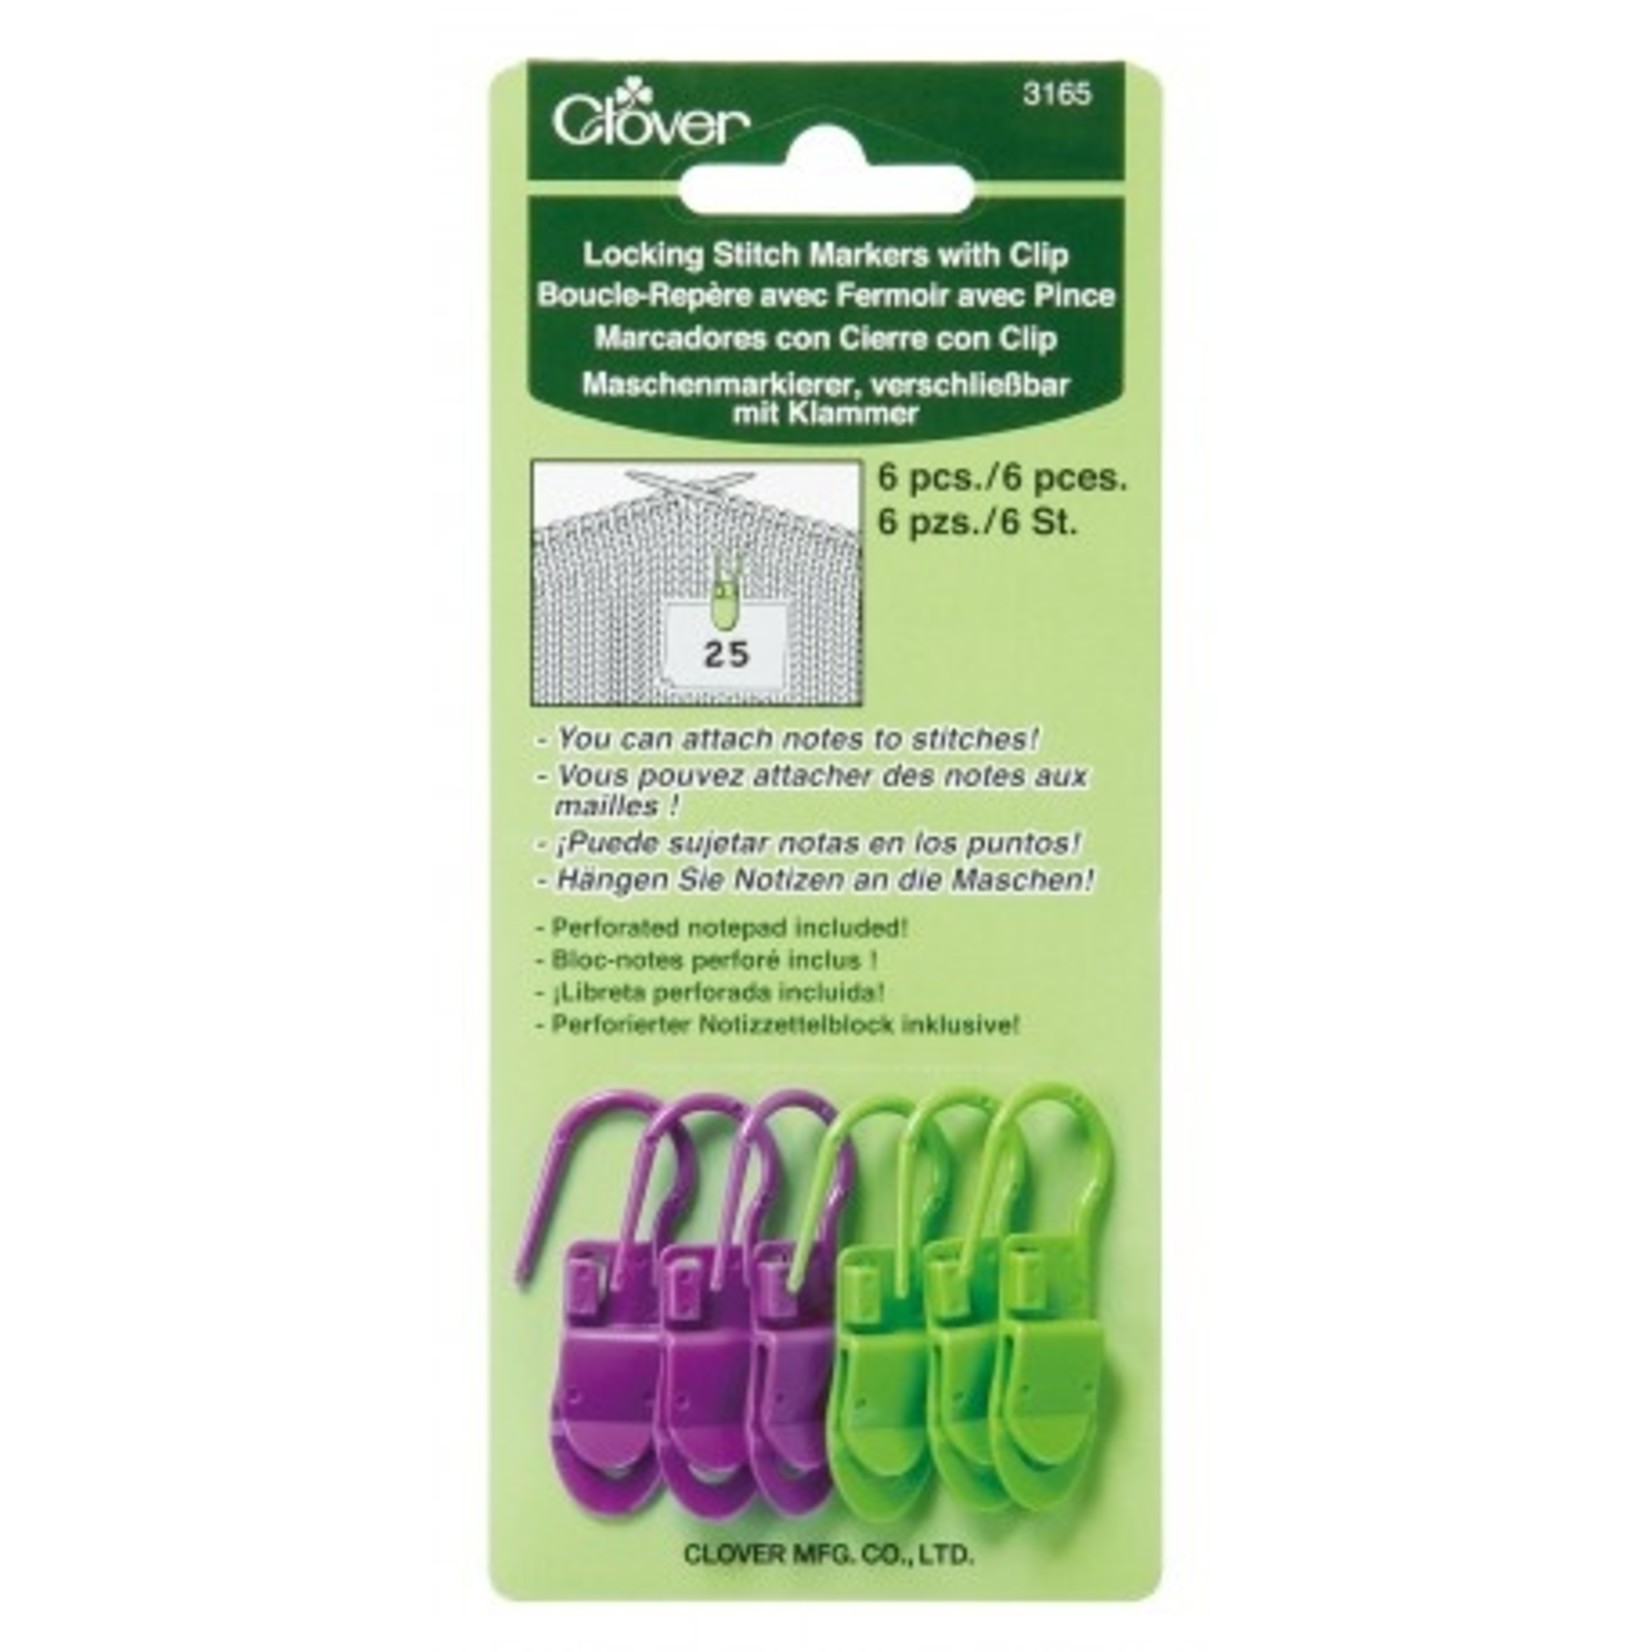 Clover Locking Stitch Markers With Clip Clover 3165